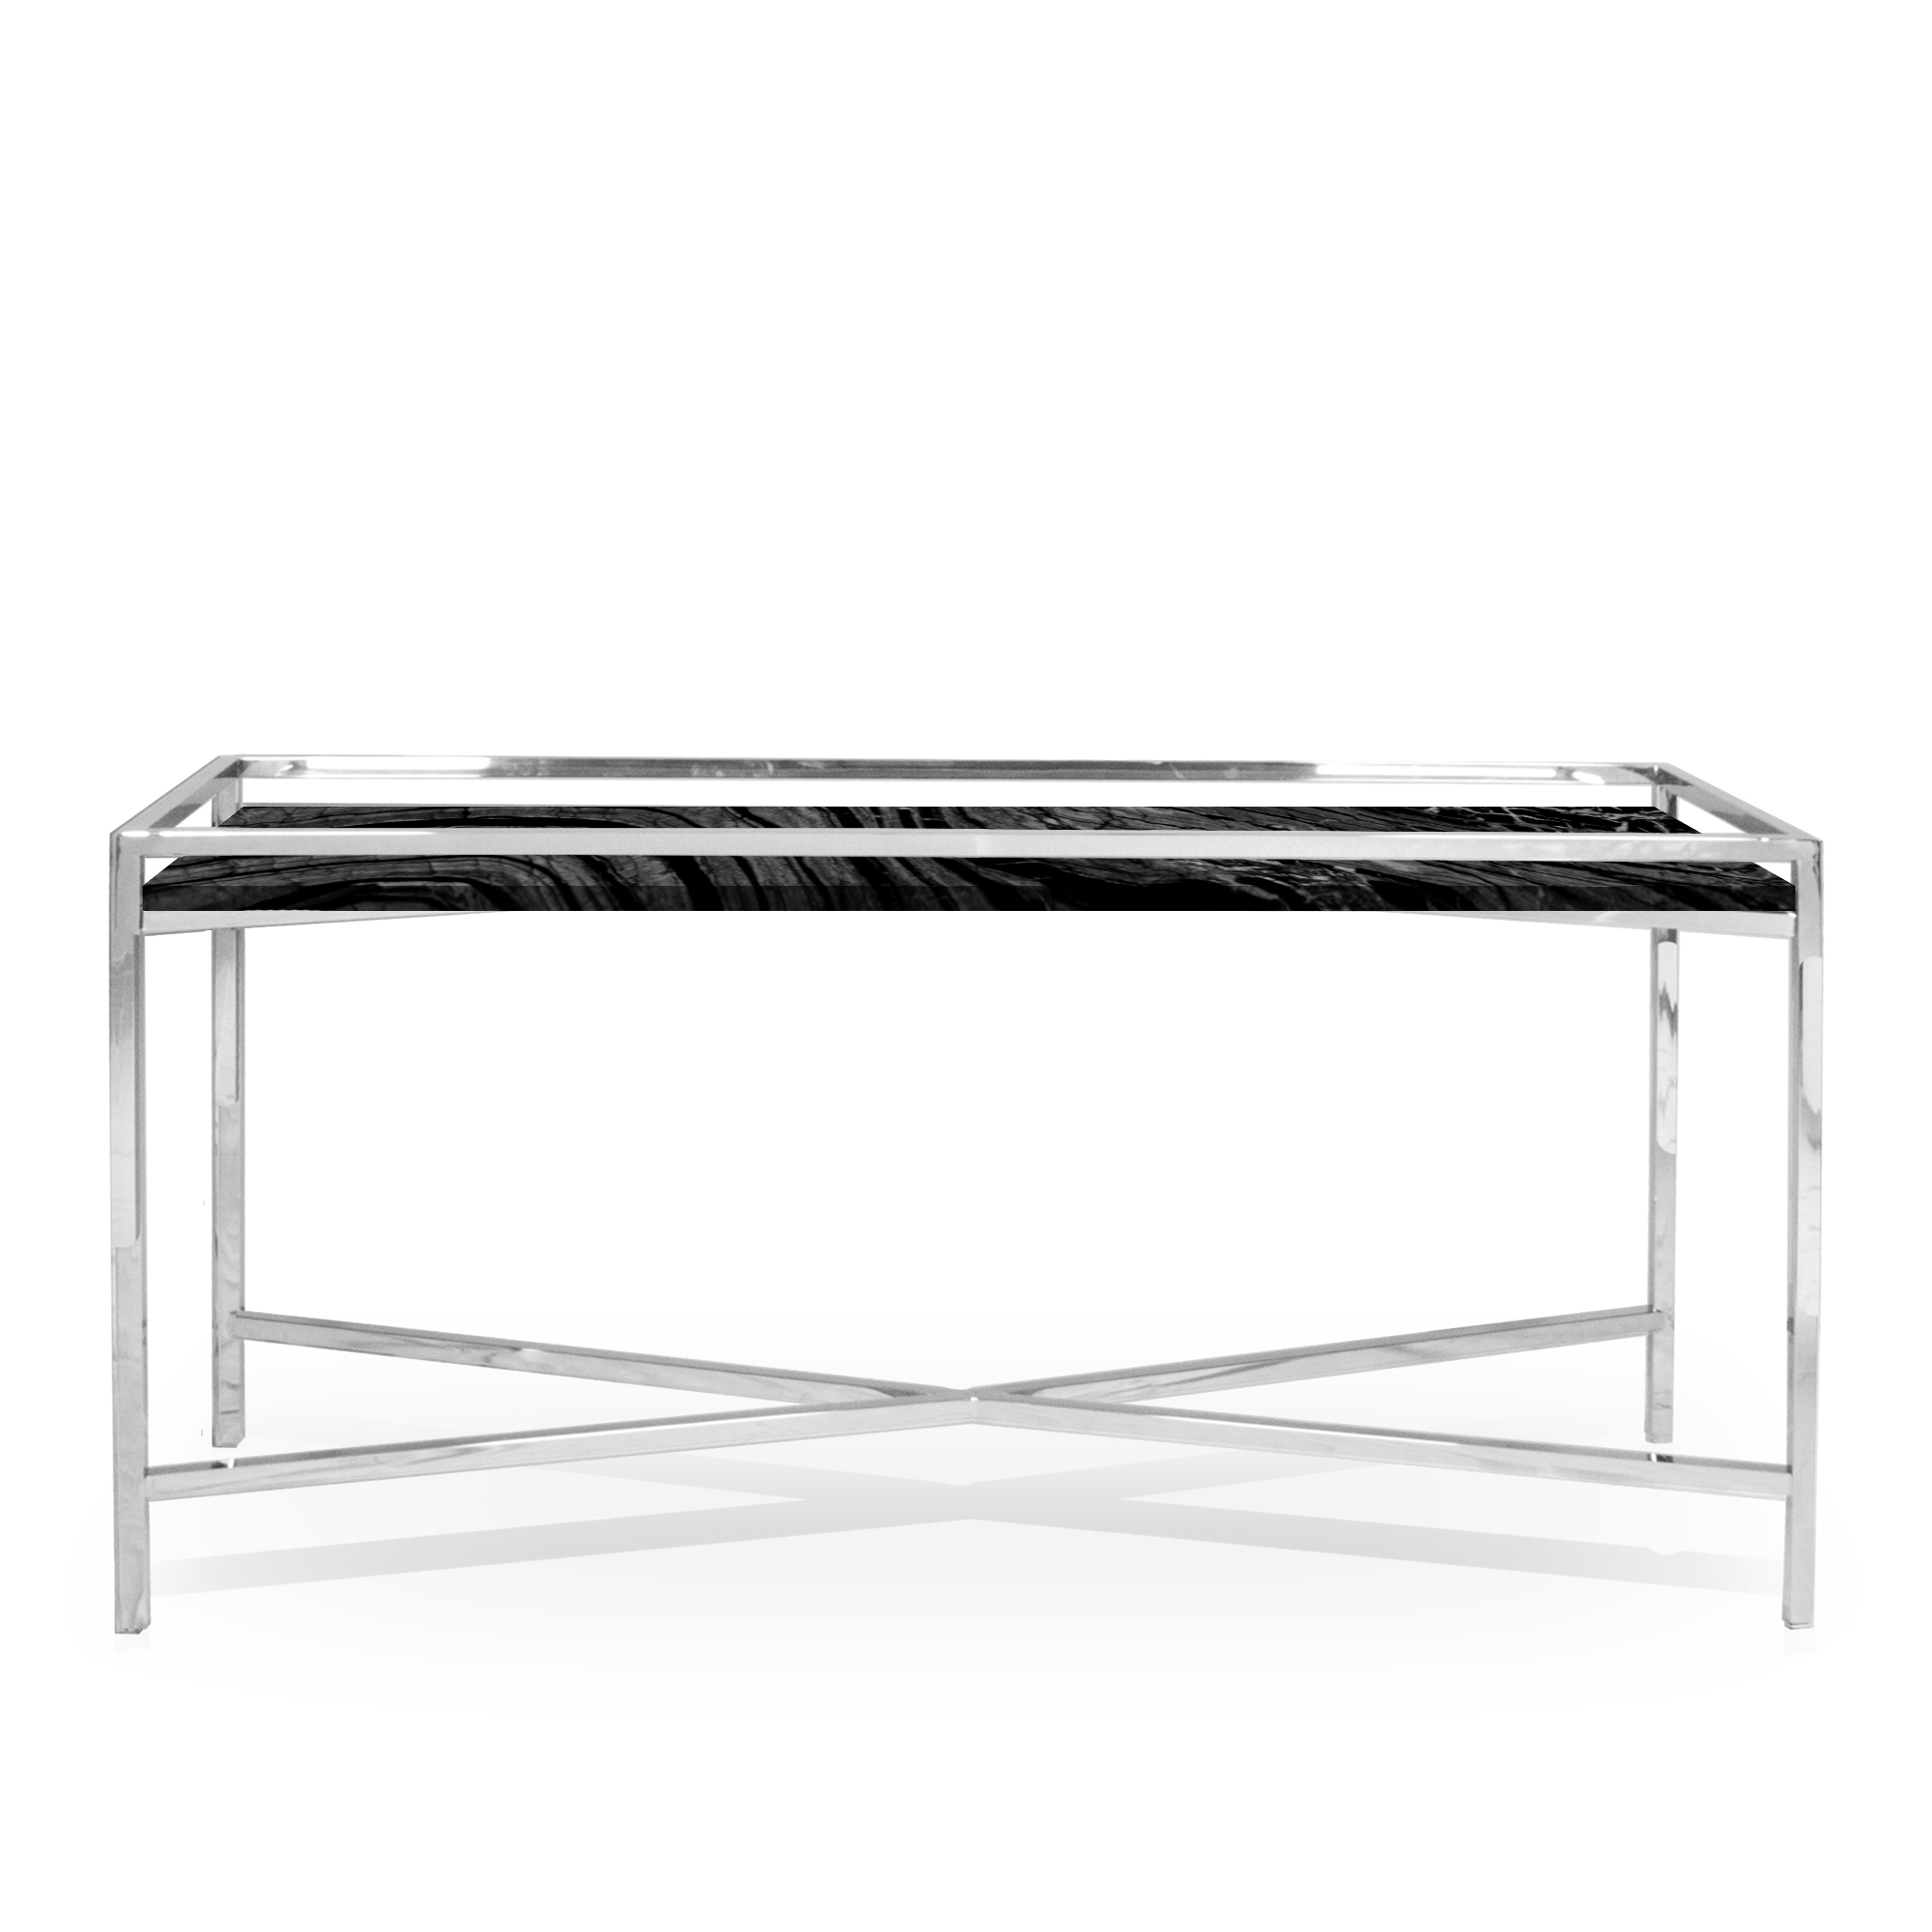 TRENTON W | Decasa Marble Marble Dining Table